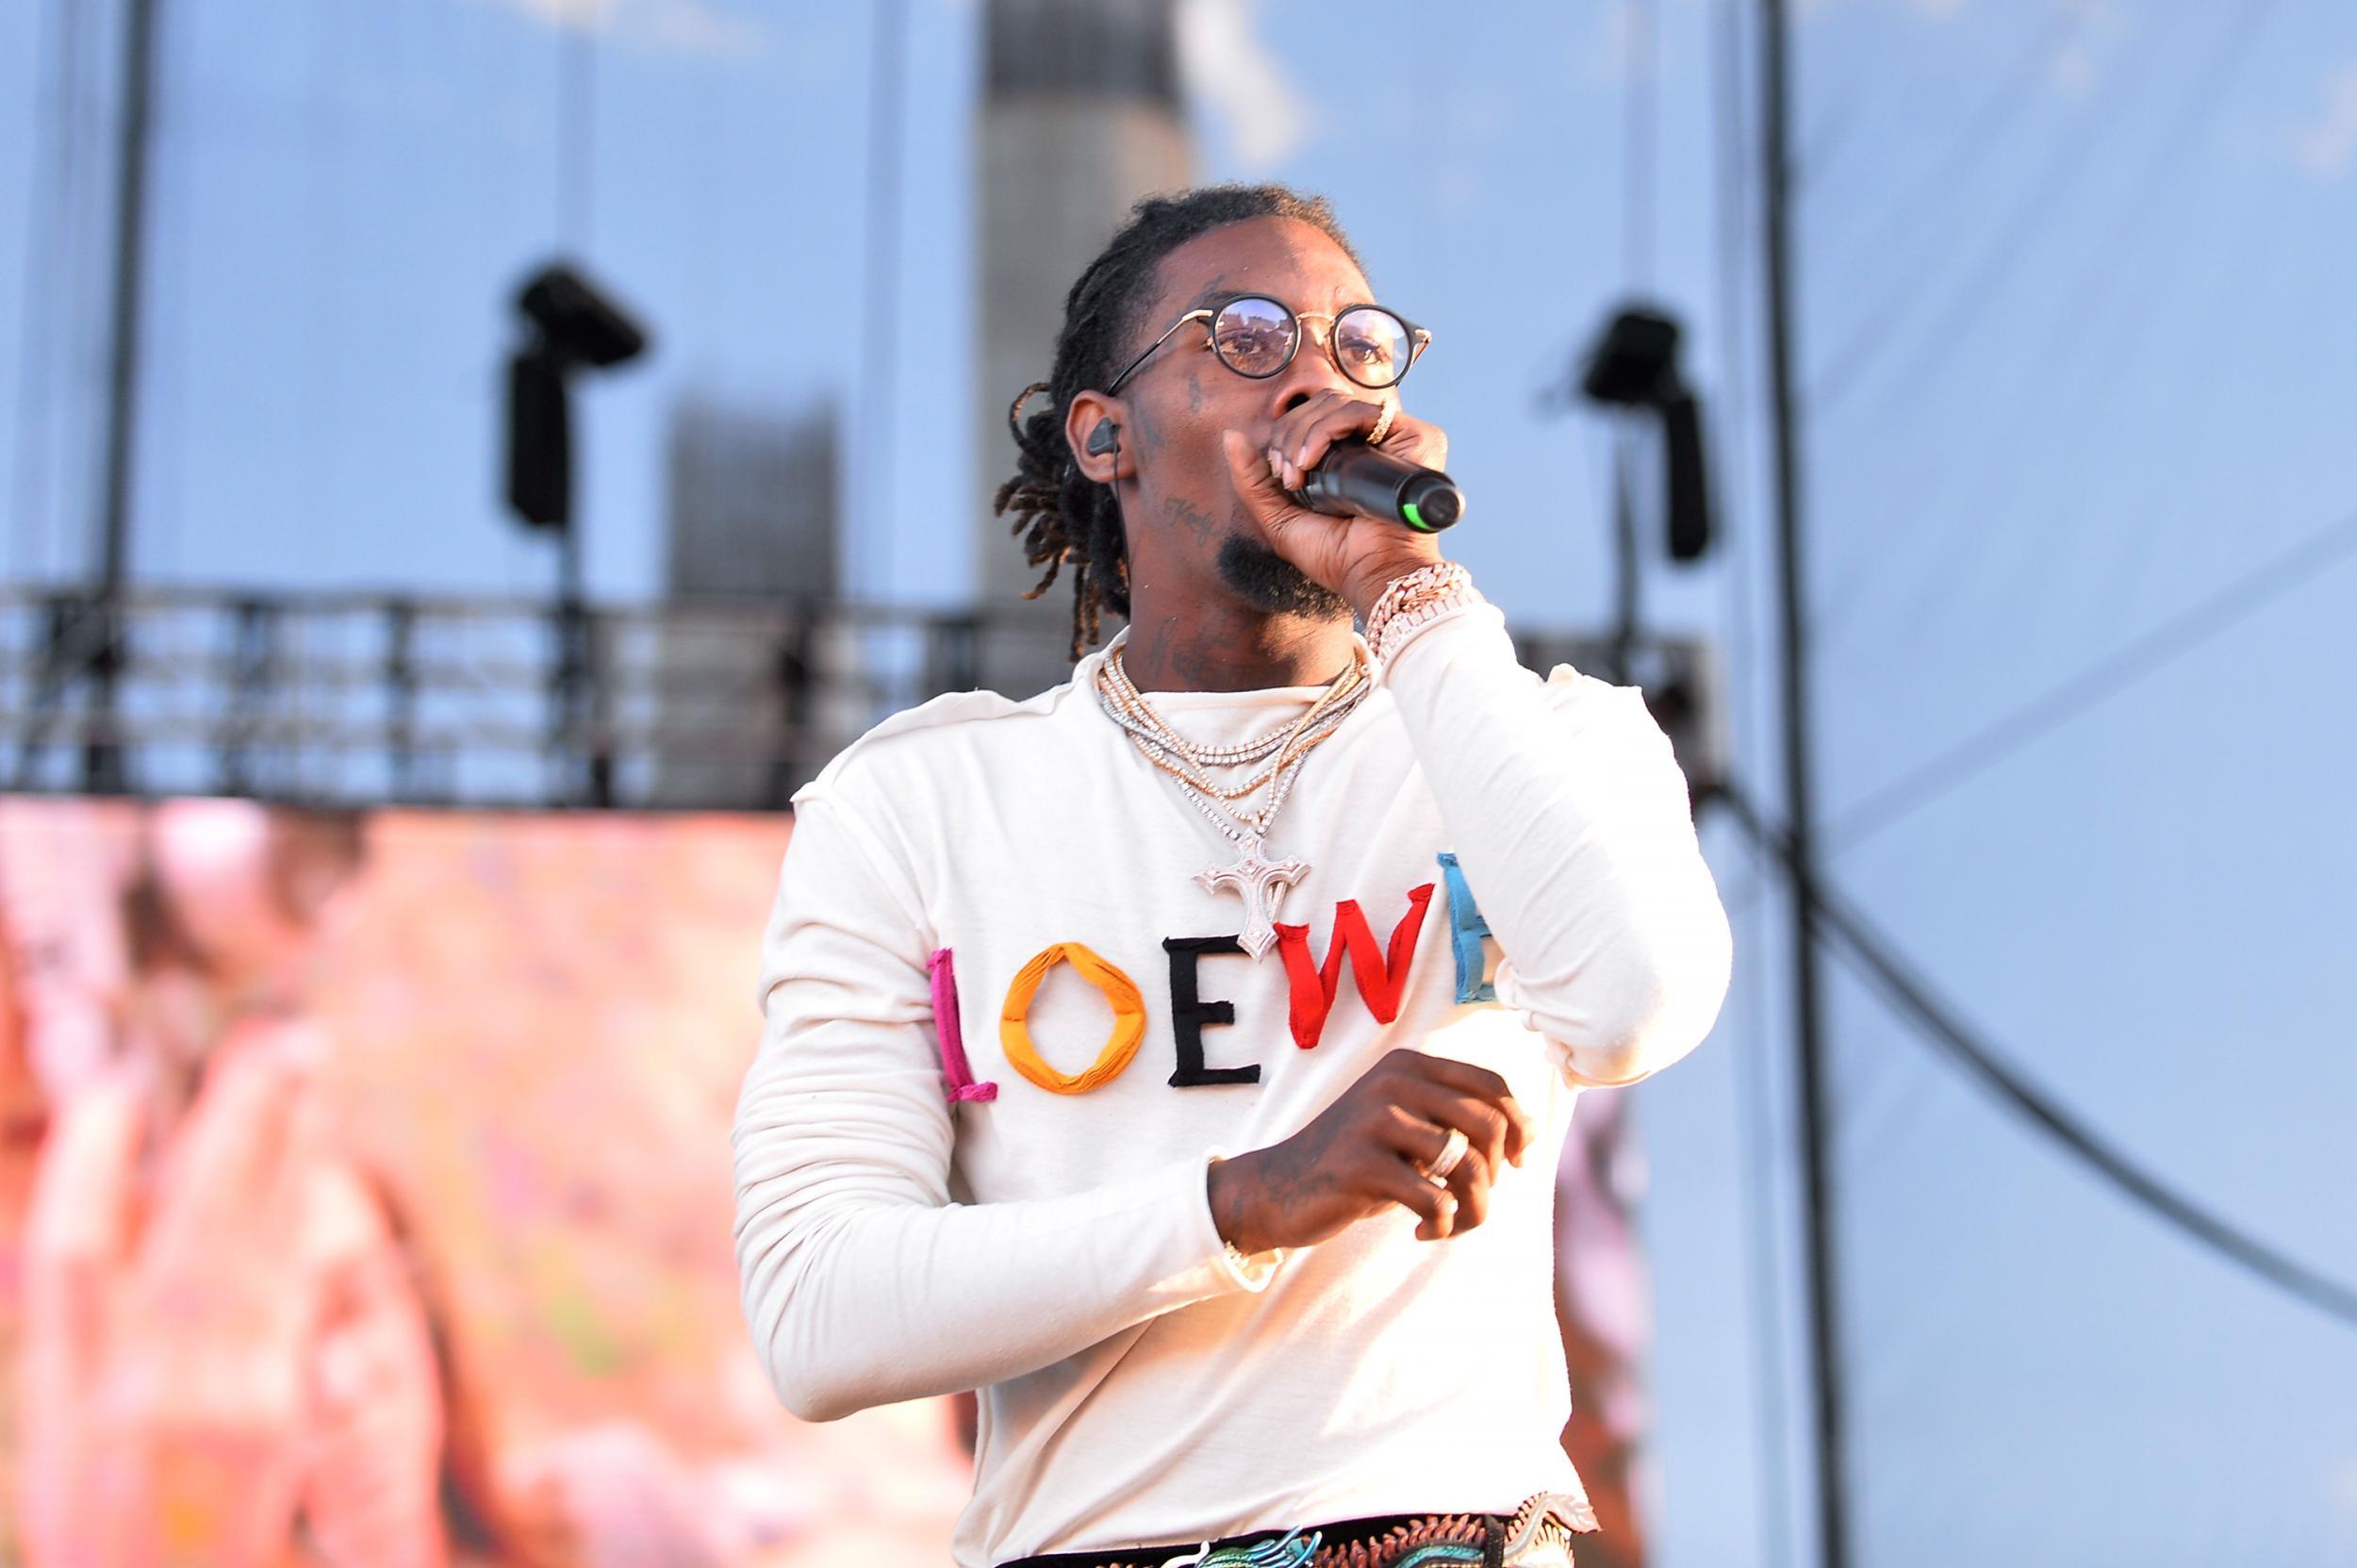 Offset of Migos performs onstage during the Daytime Village Presented by Capital One at the 2017 HeartRadio Music Festival at the Las Vegas Village on September 23, 2017 in Las Vegas, Nevada. Credit: Bryan Steffy/Getty Images for iHeartMedia.